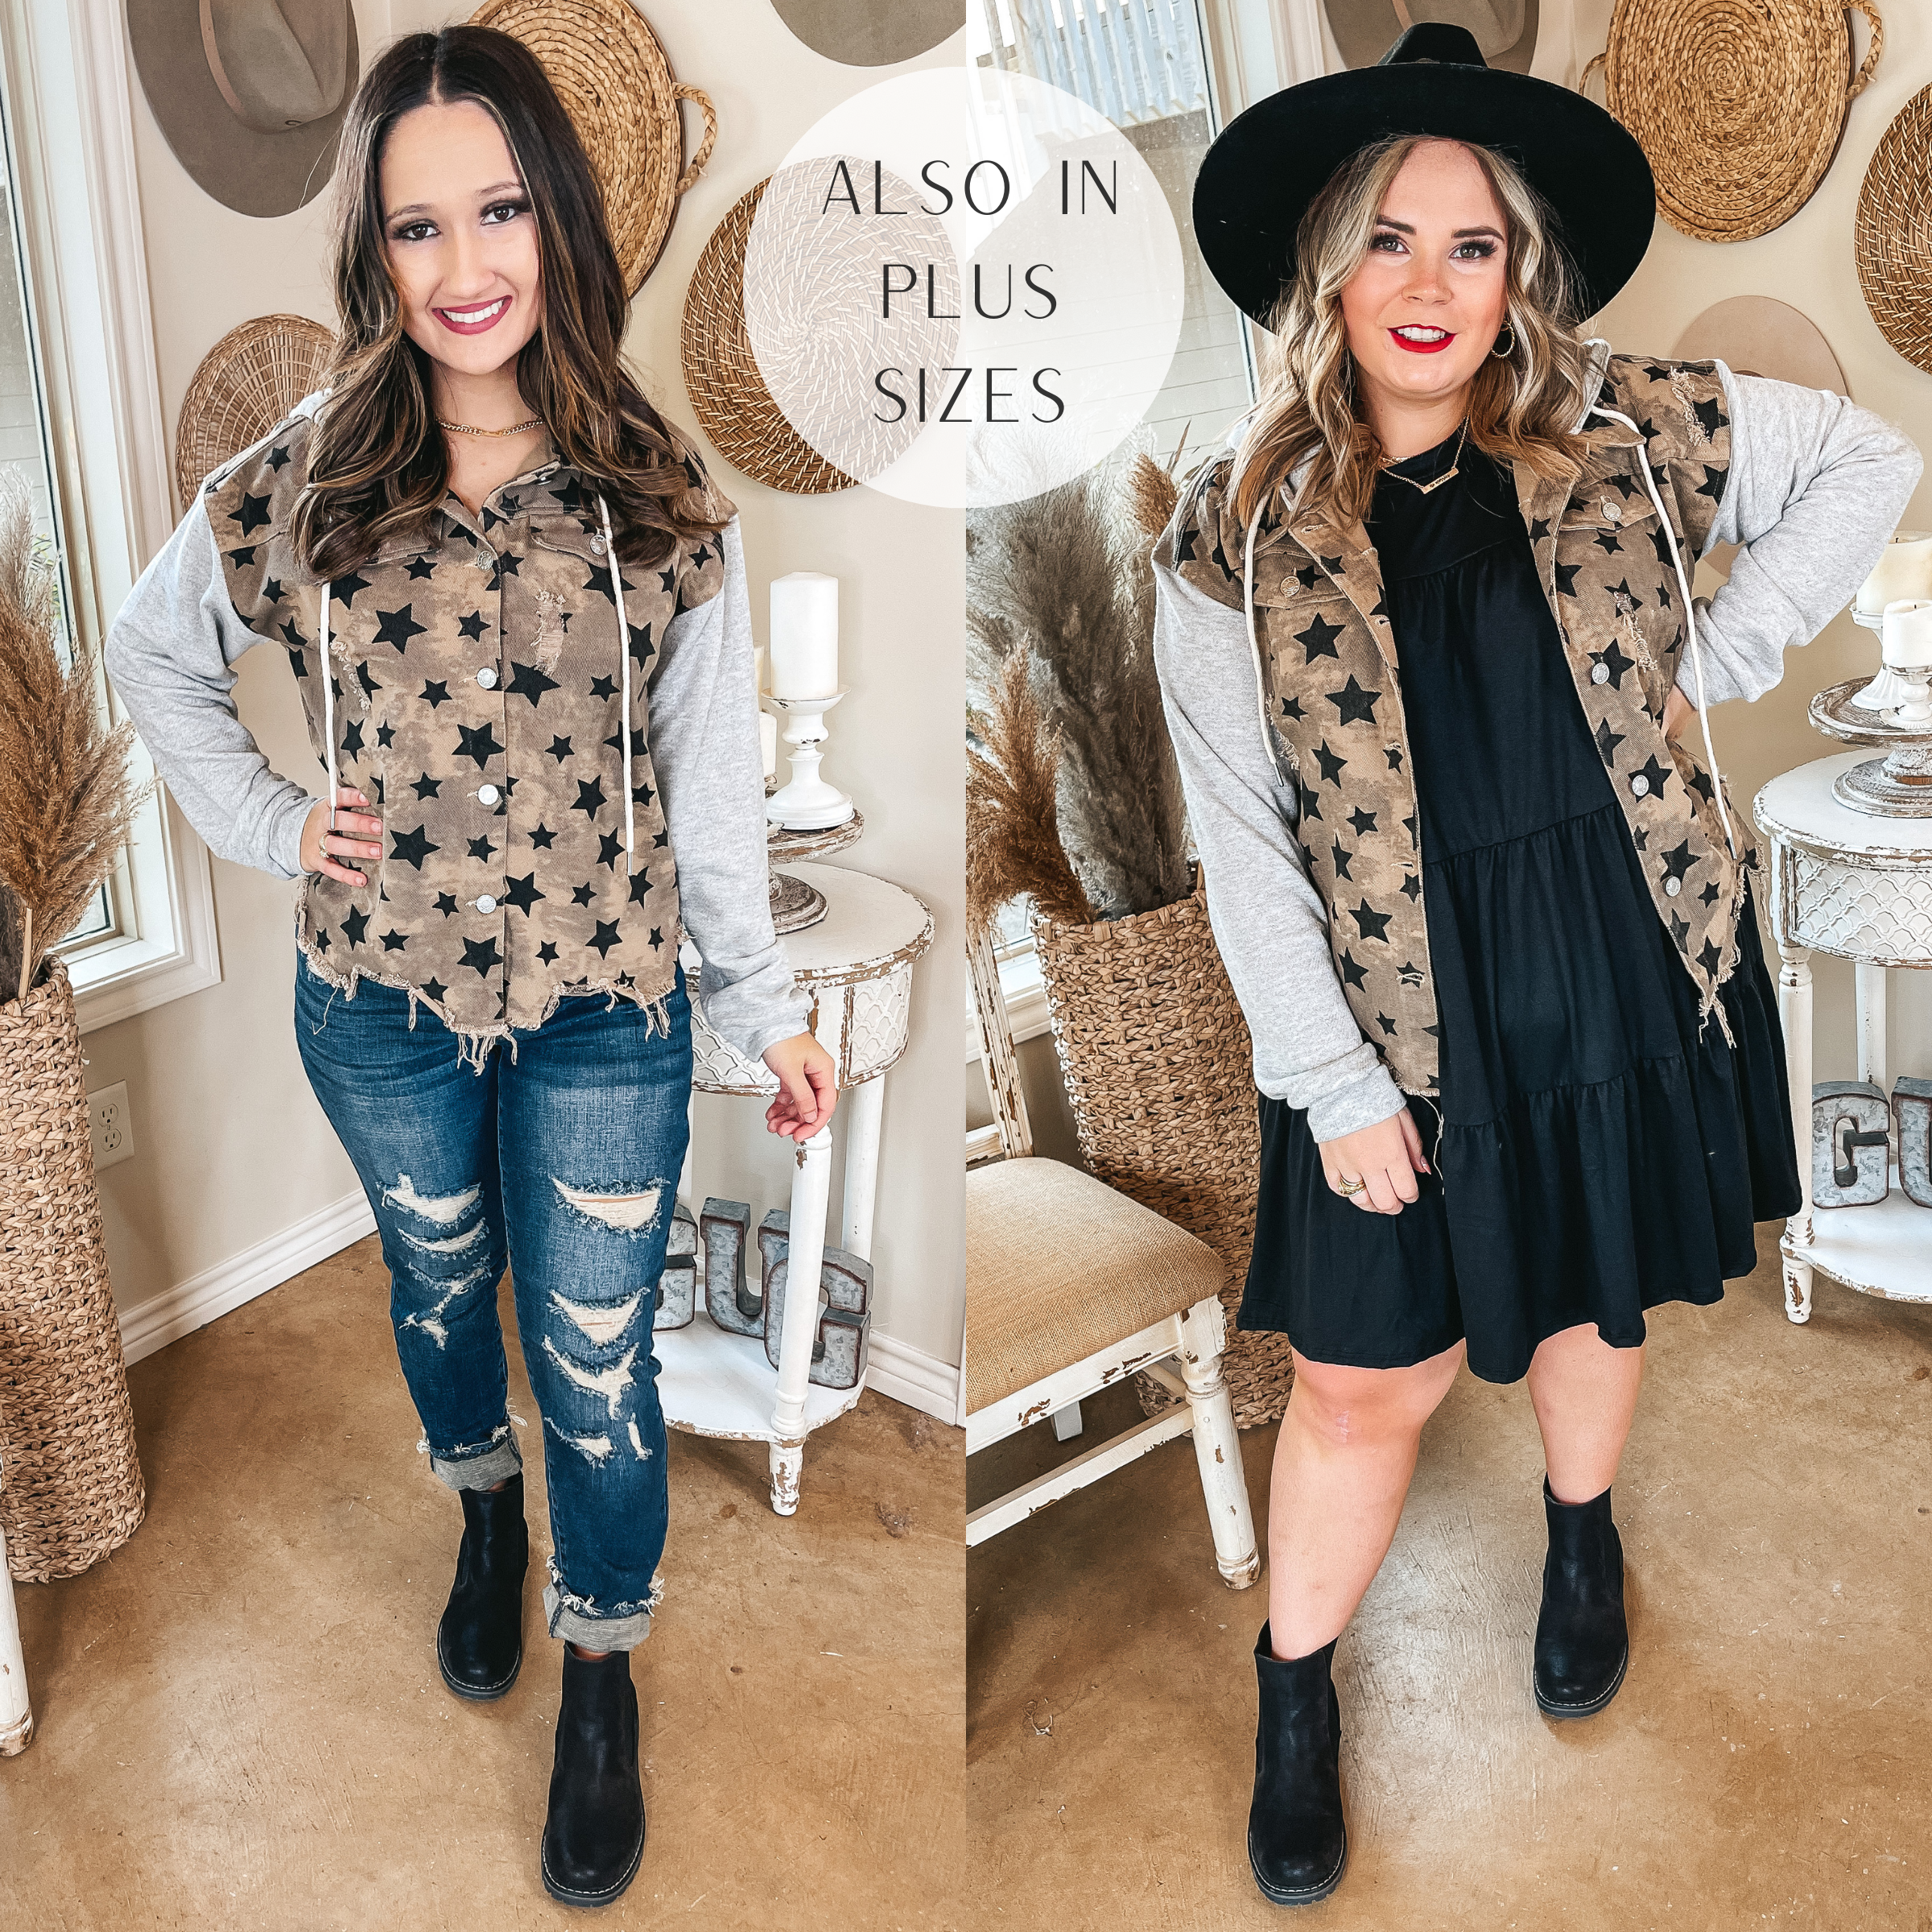 Models are wearing a star print hoodie jacket. Small size model has it paired with distressed jeans, black booties, and gold jewelry. Plus size model has it paired with a black dress, black hat, and black booties.